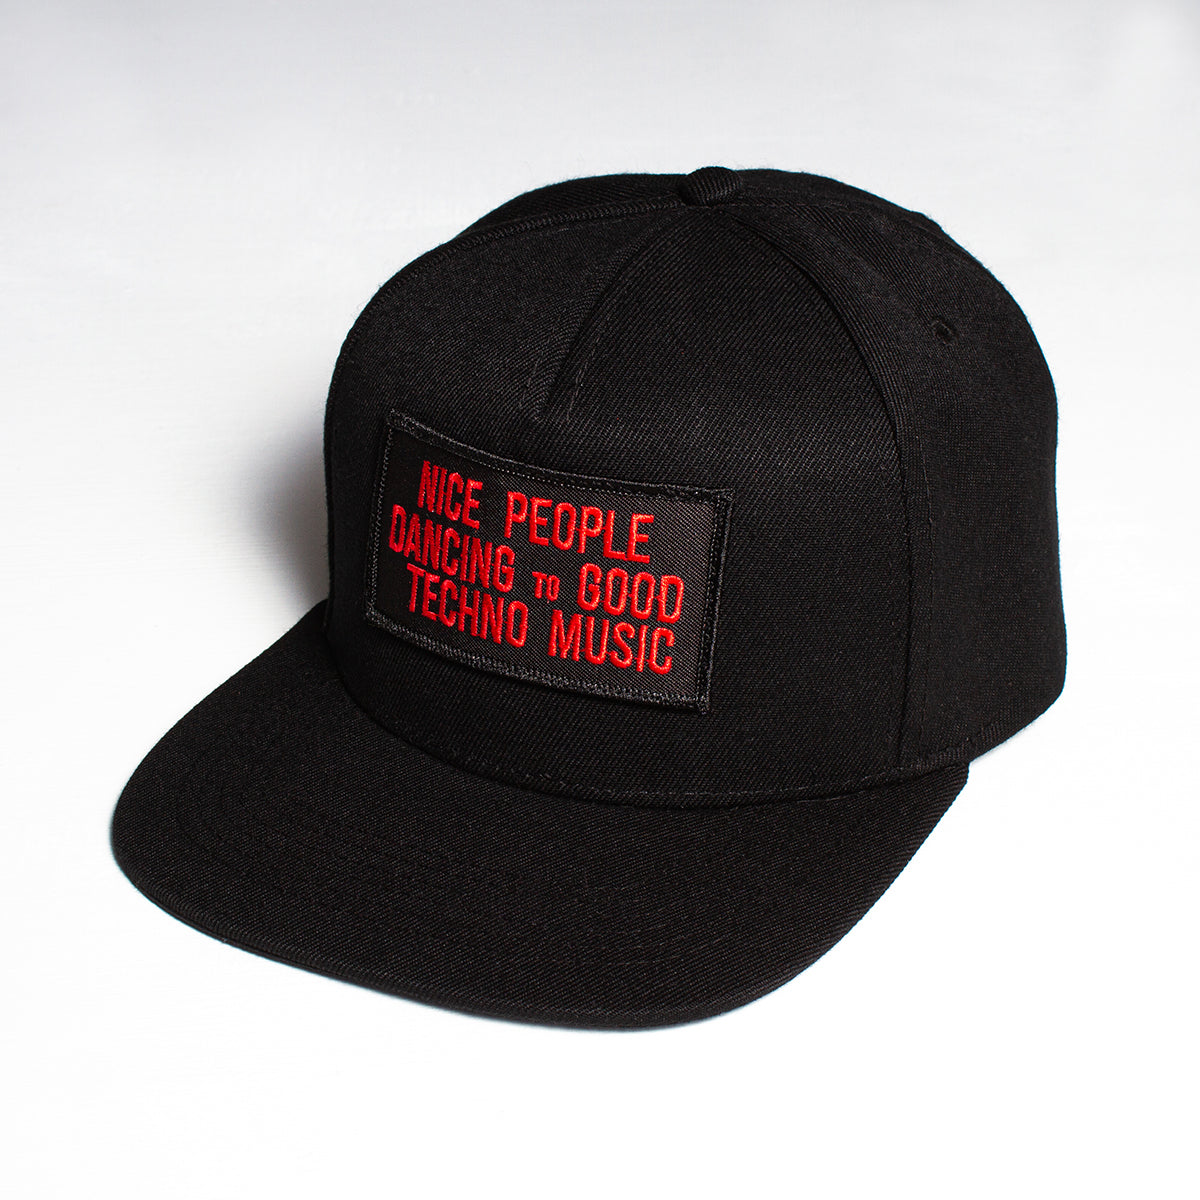 Peoples Techno - Snapback - Black - Wasted Heroes